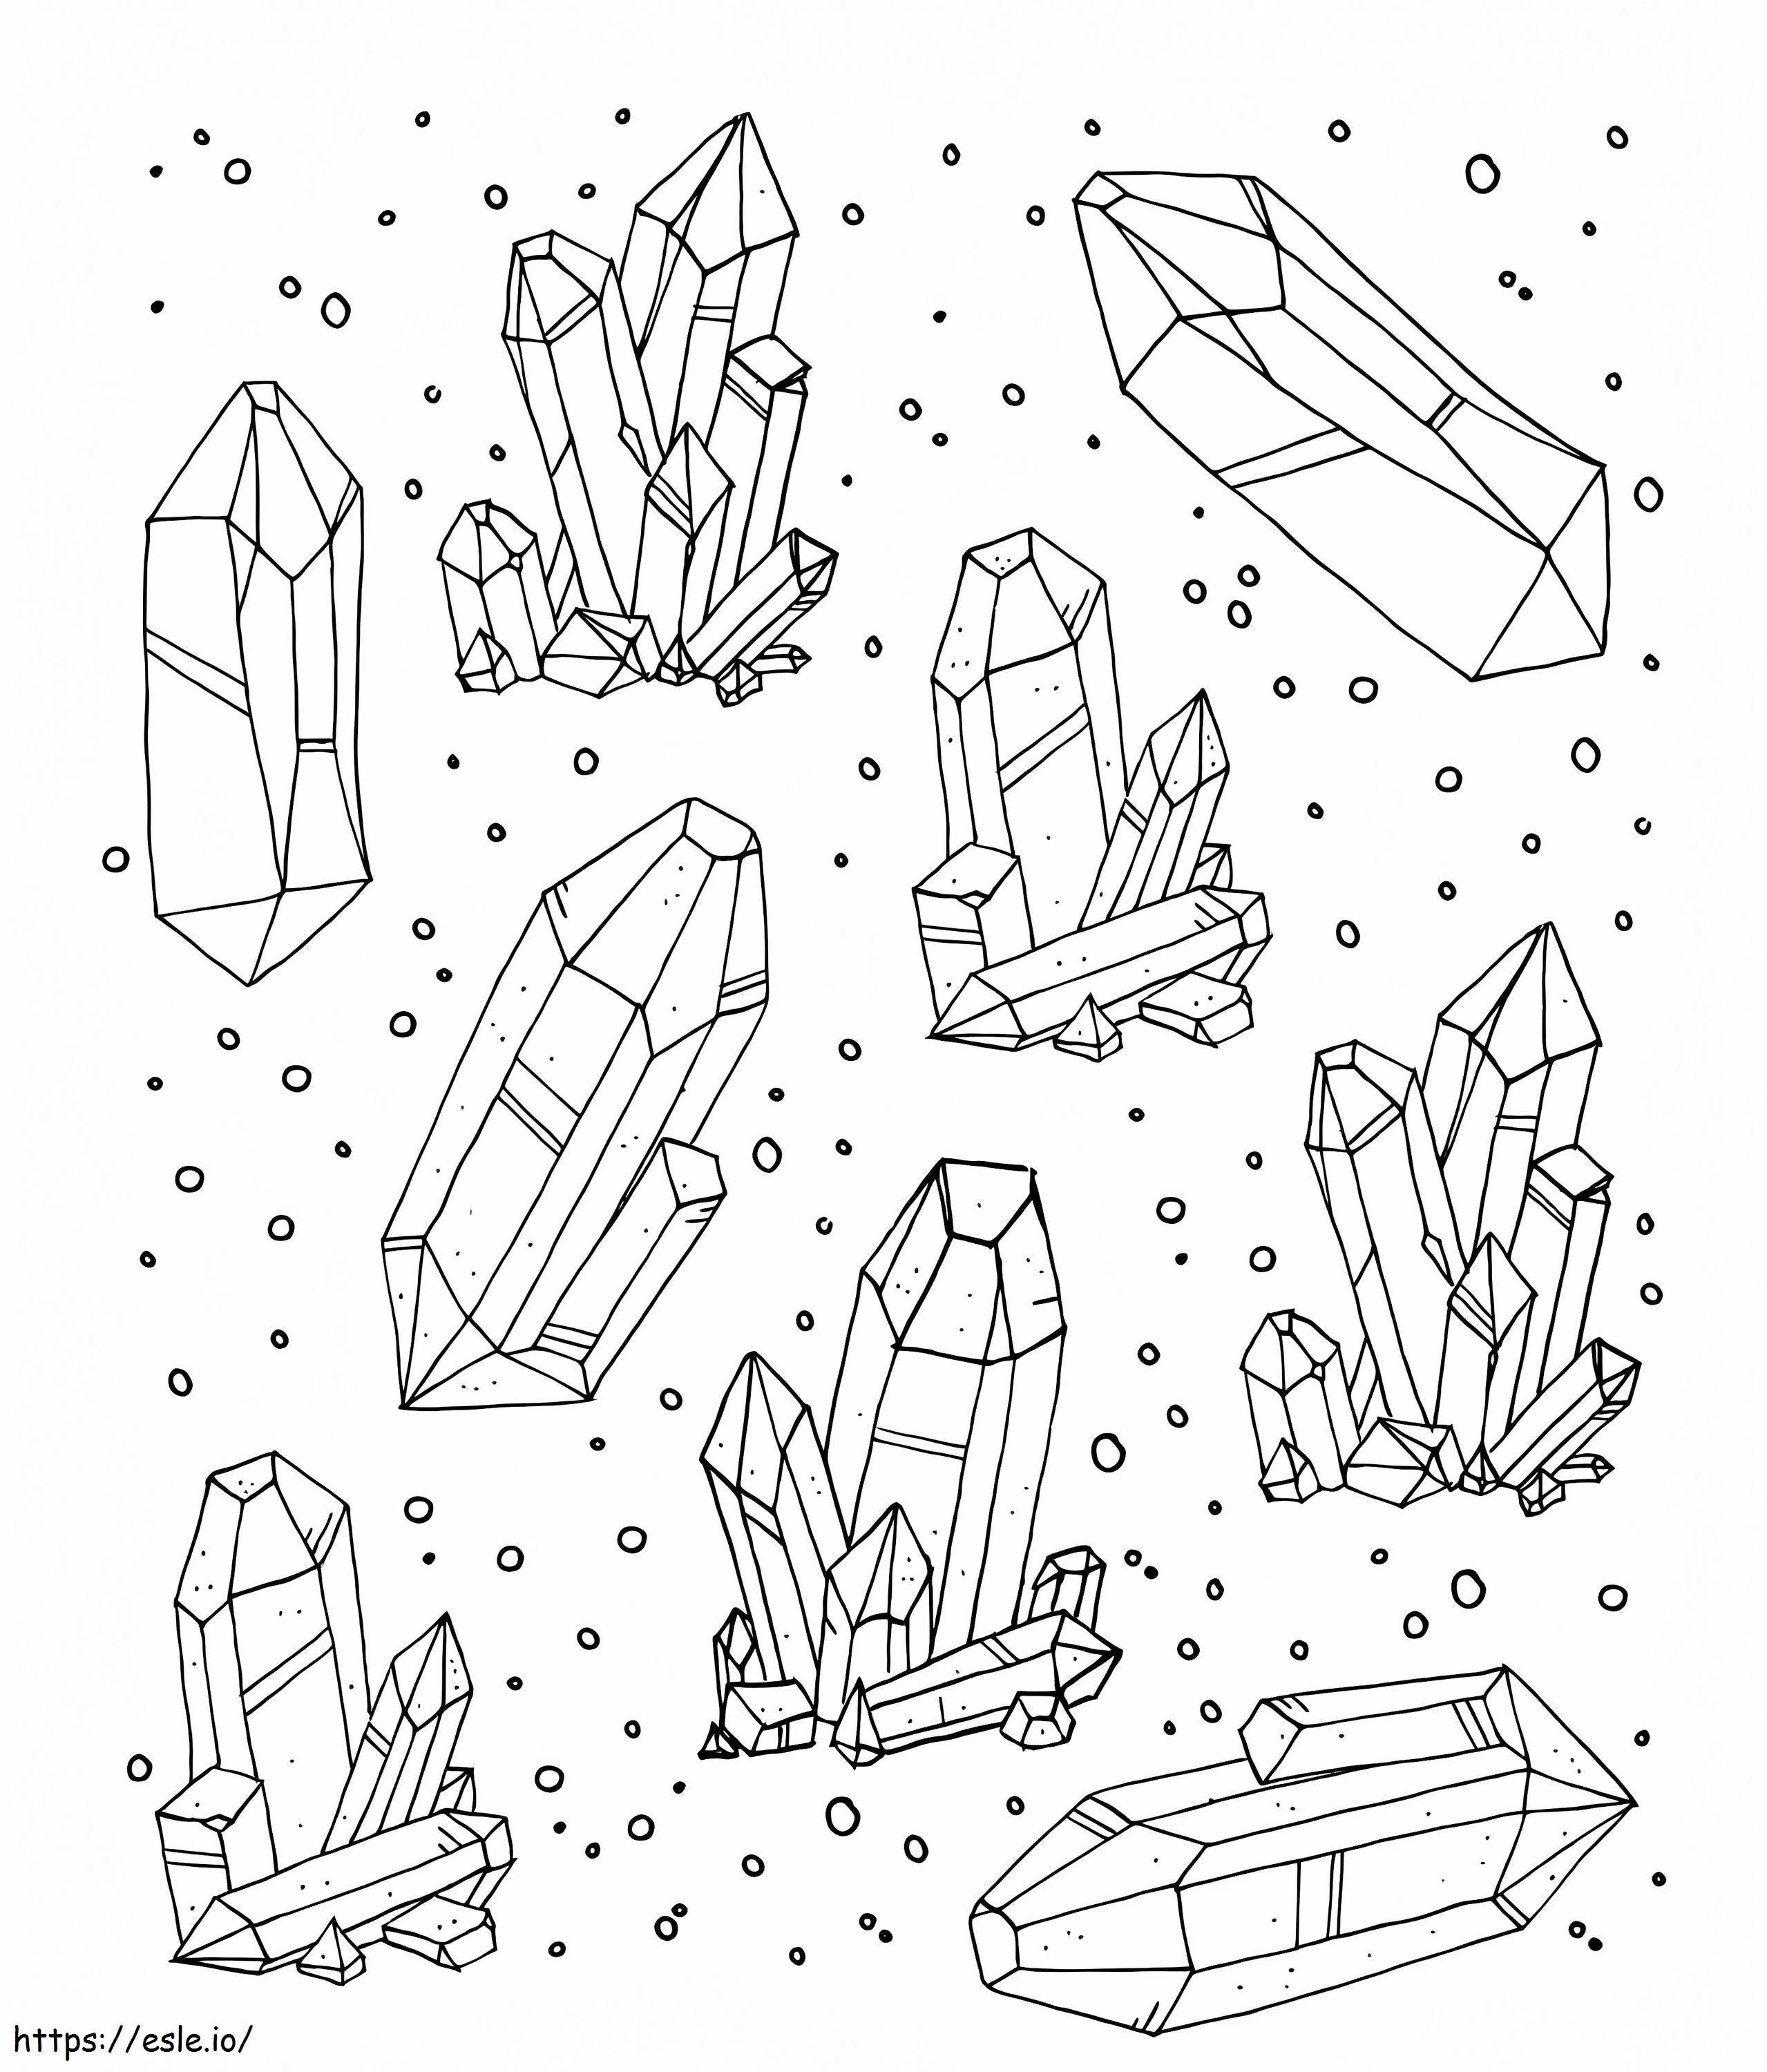 Crystal 2 coloring page